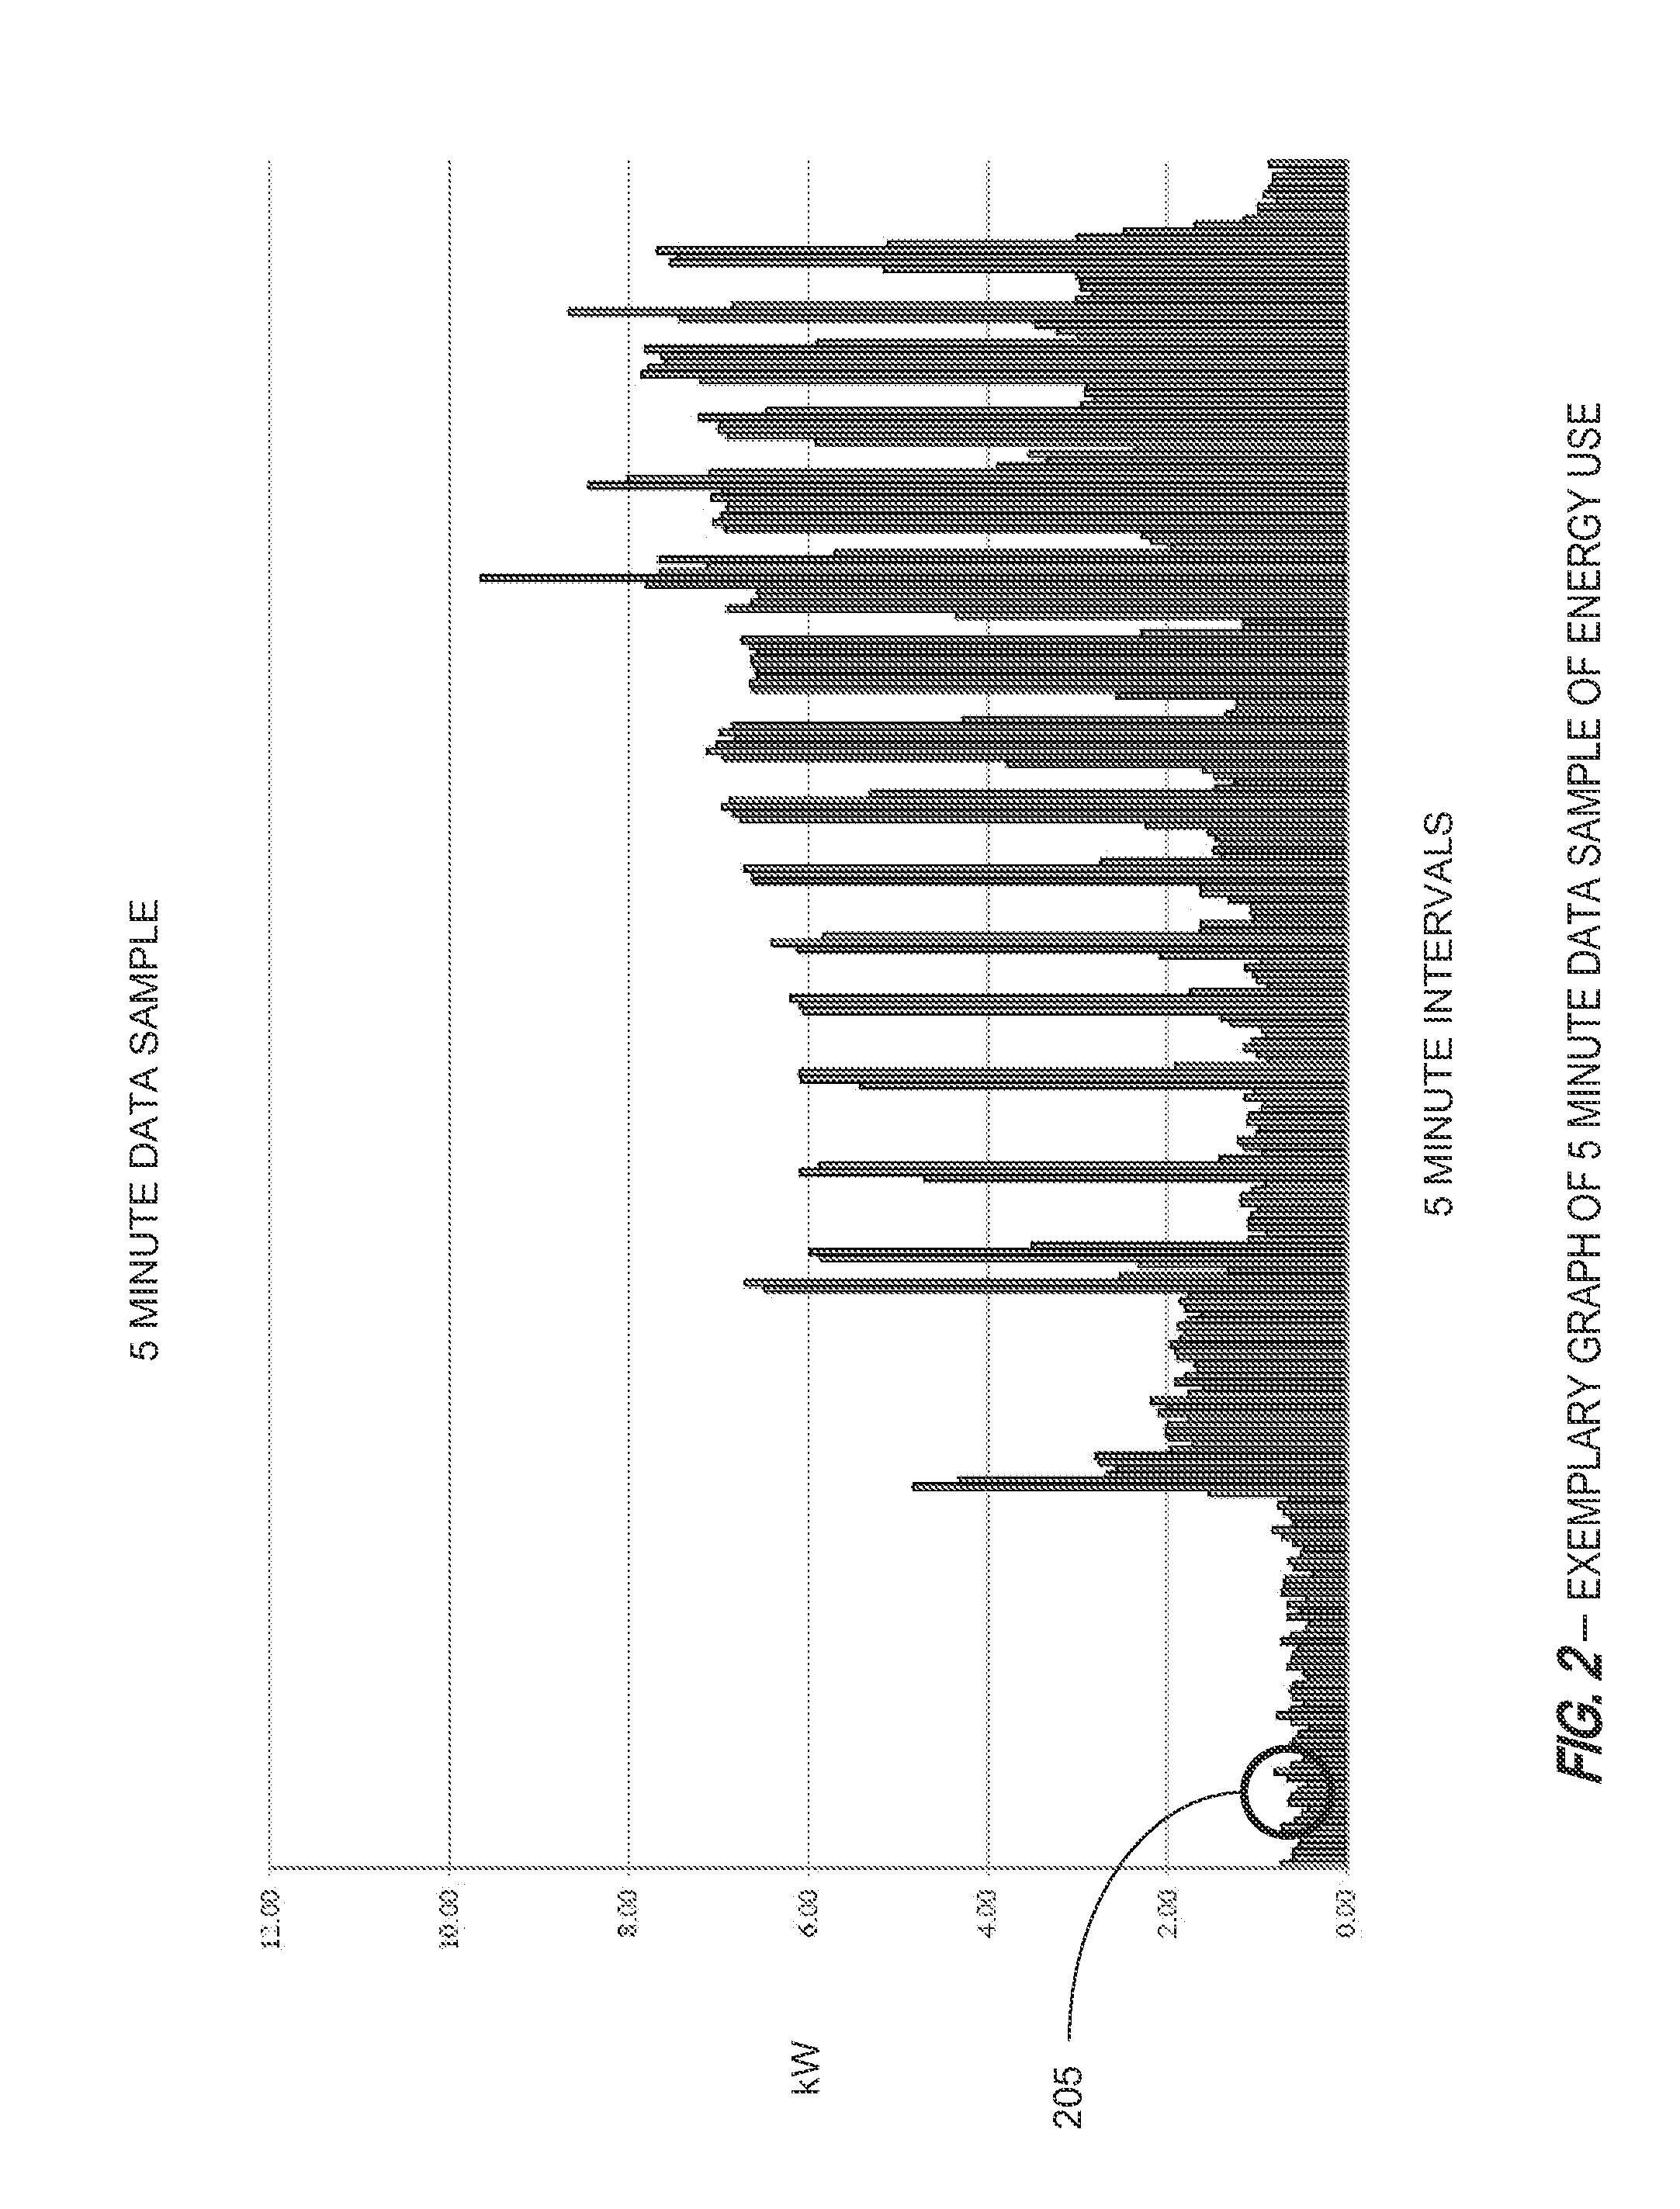 Systems and Methods for Monitoring Energy Usage via Thermostat-Centered Approaches and Deriving Building Climate Analytics